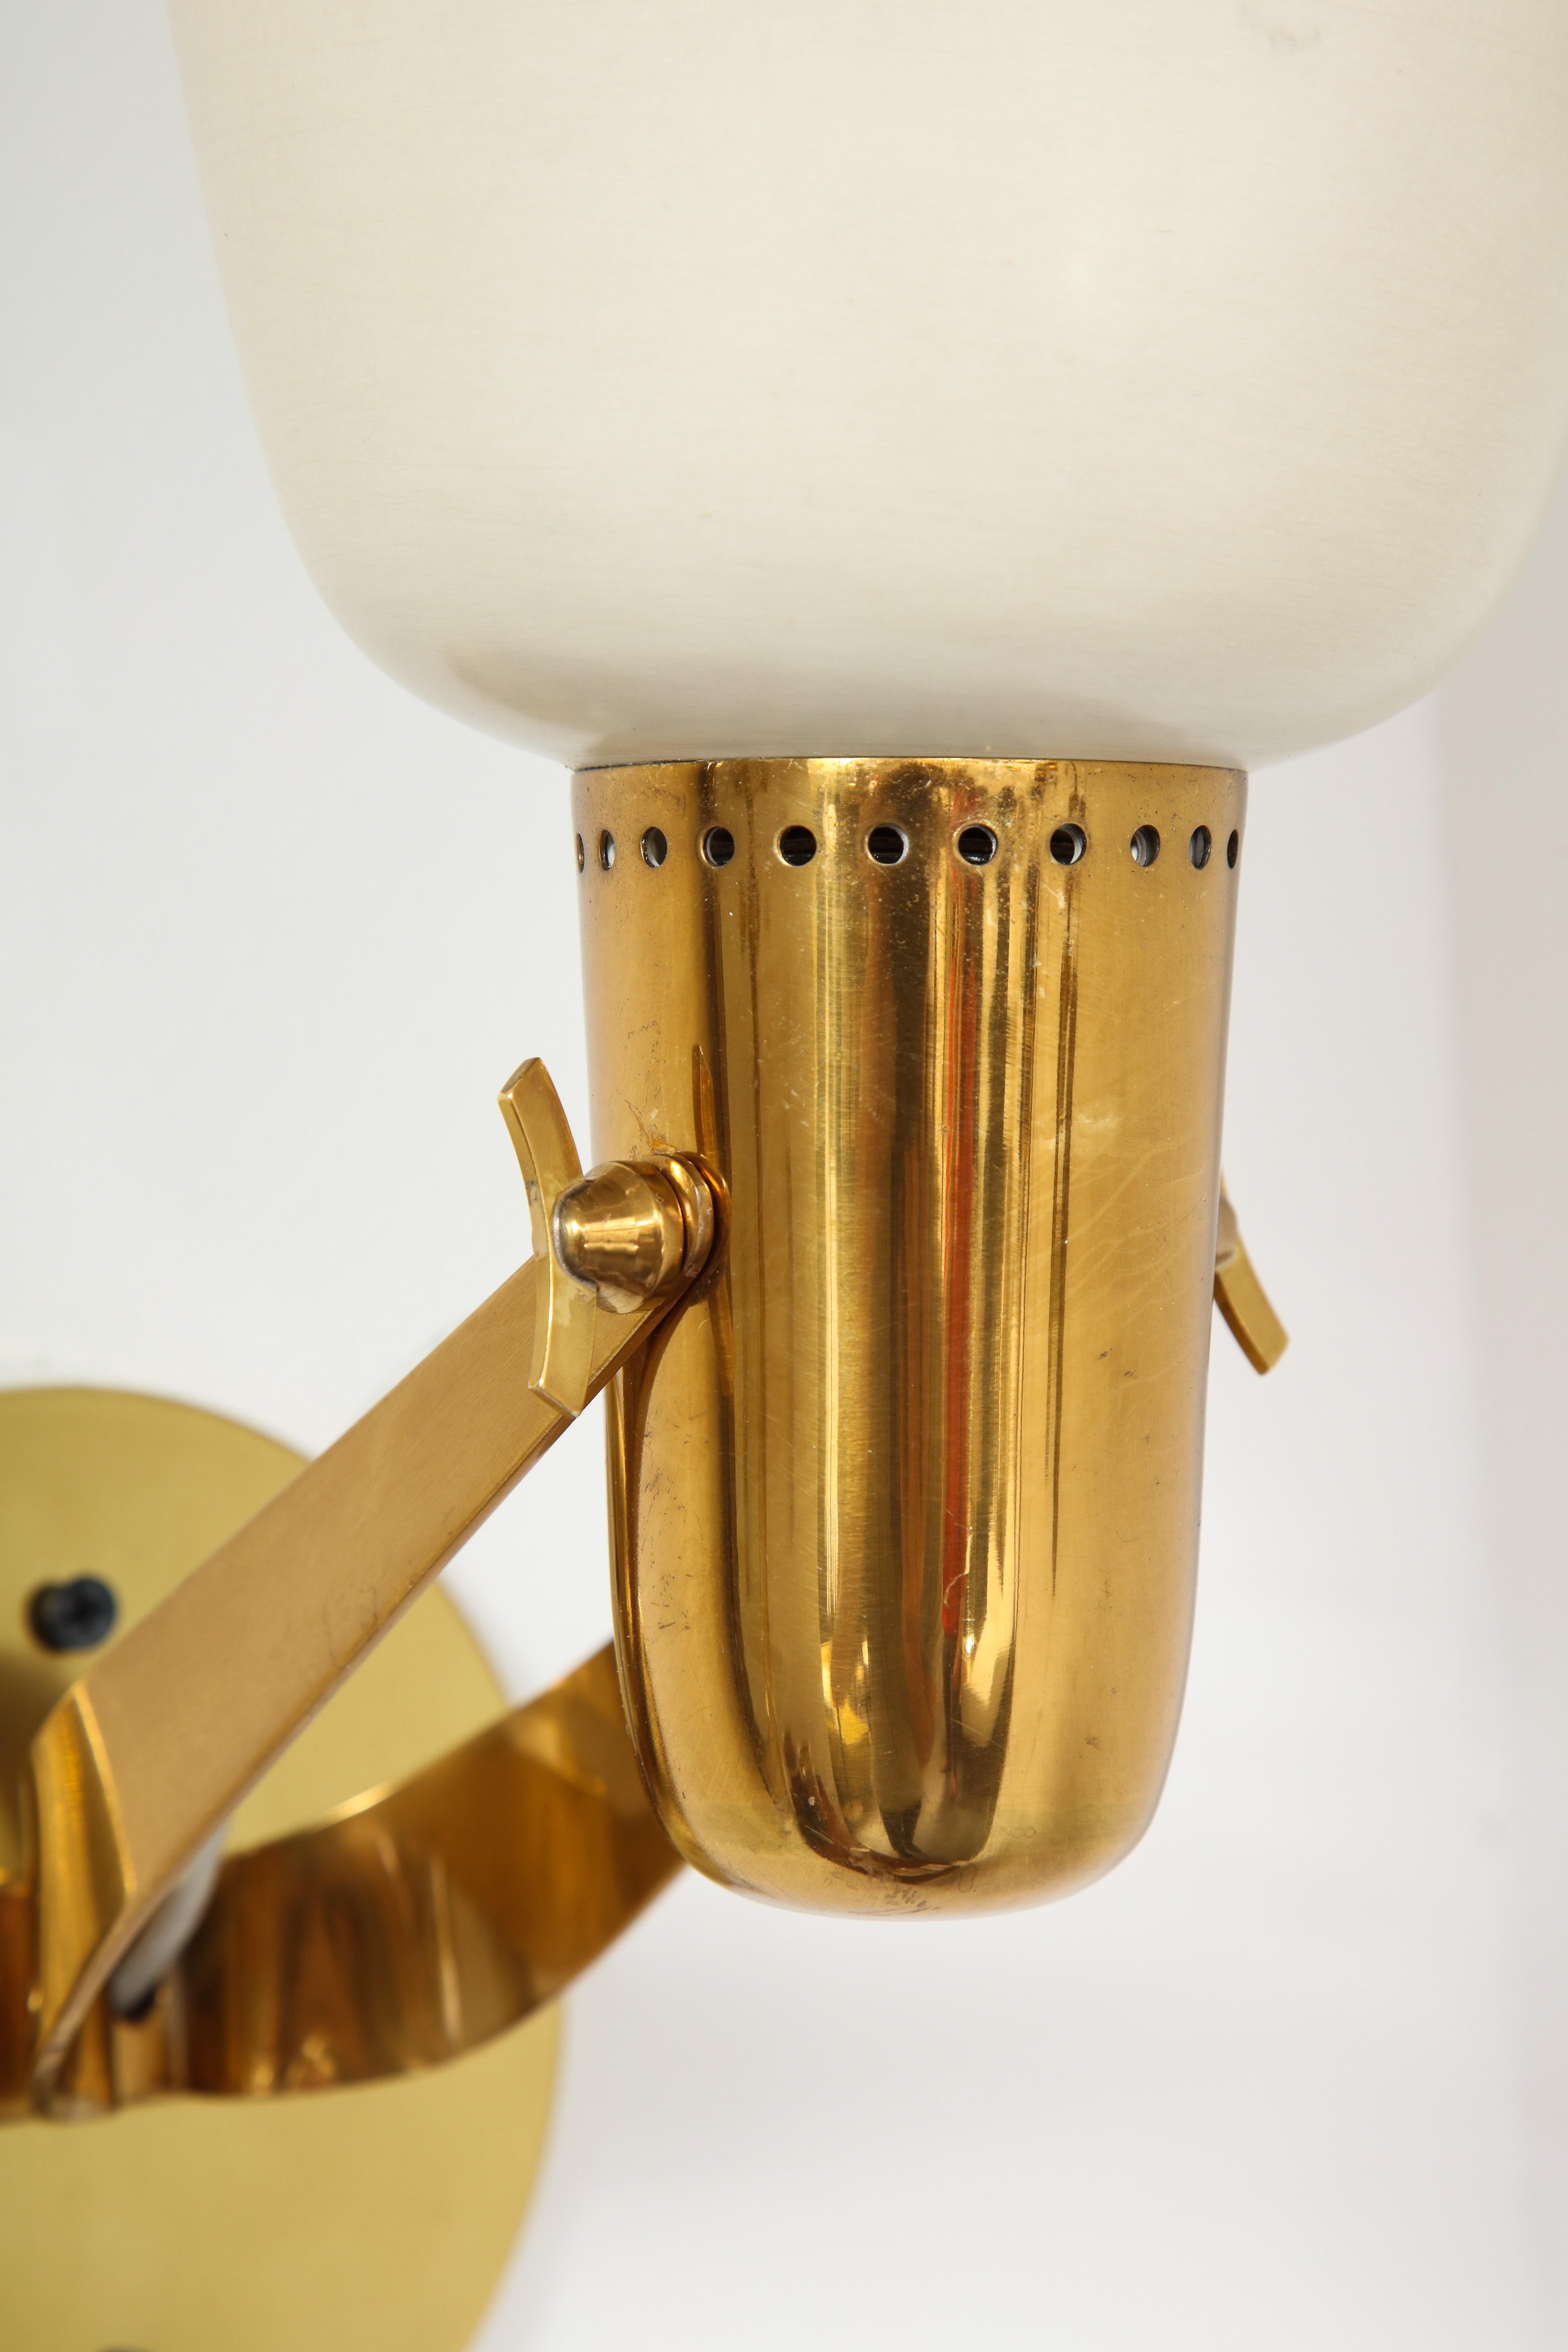 Lacquered Gino Sarfatti for Arteluce Rare Large Pair of Sconces Model 121, Italy, 1940s